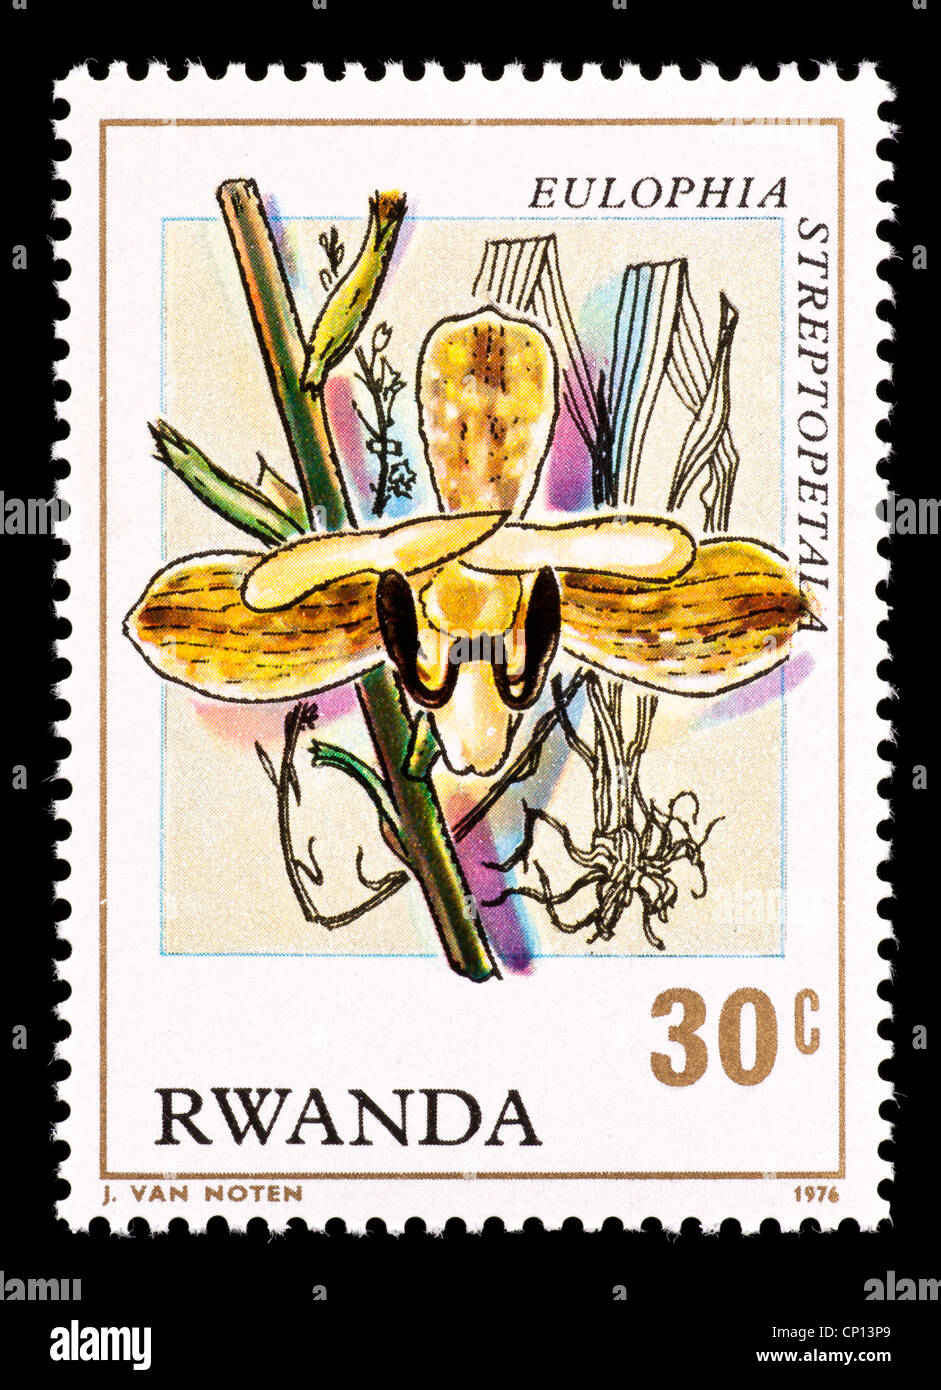 Postage stamp from Rwanda depicting a tropical orchid (Eulophia streptopetai) Stock Photo